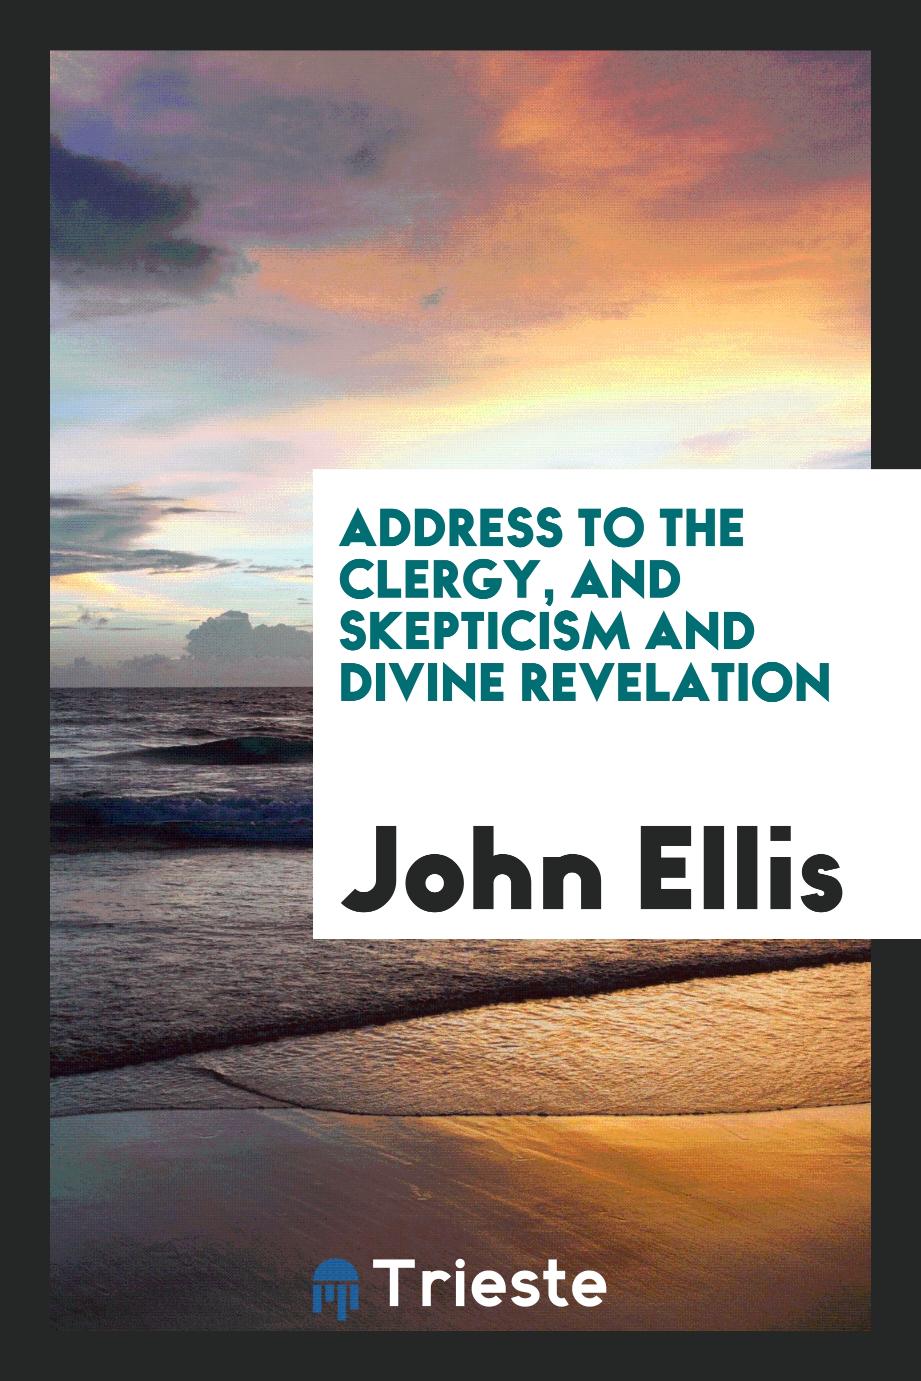 Address to the Clergy, and Skepticism and Divine Revelation